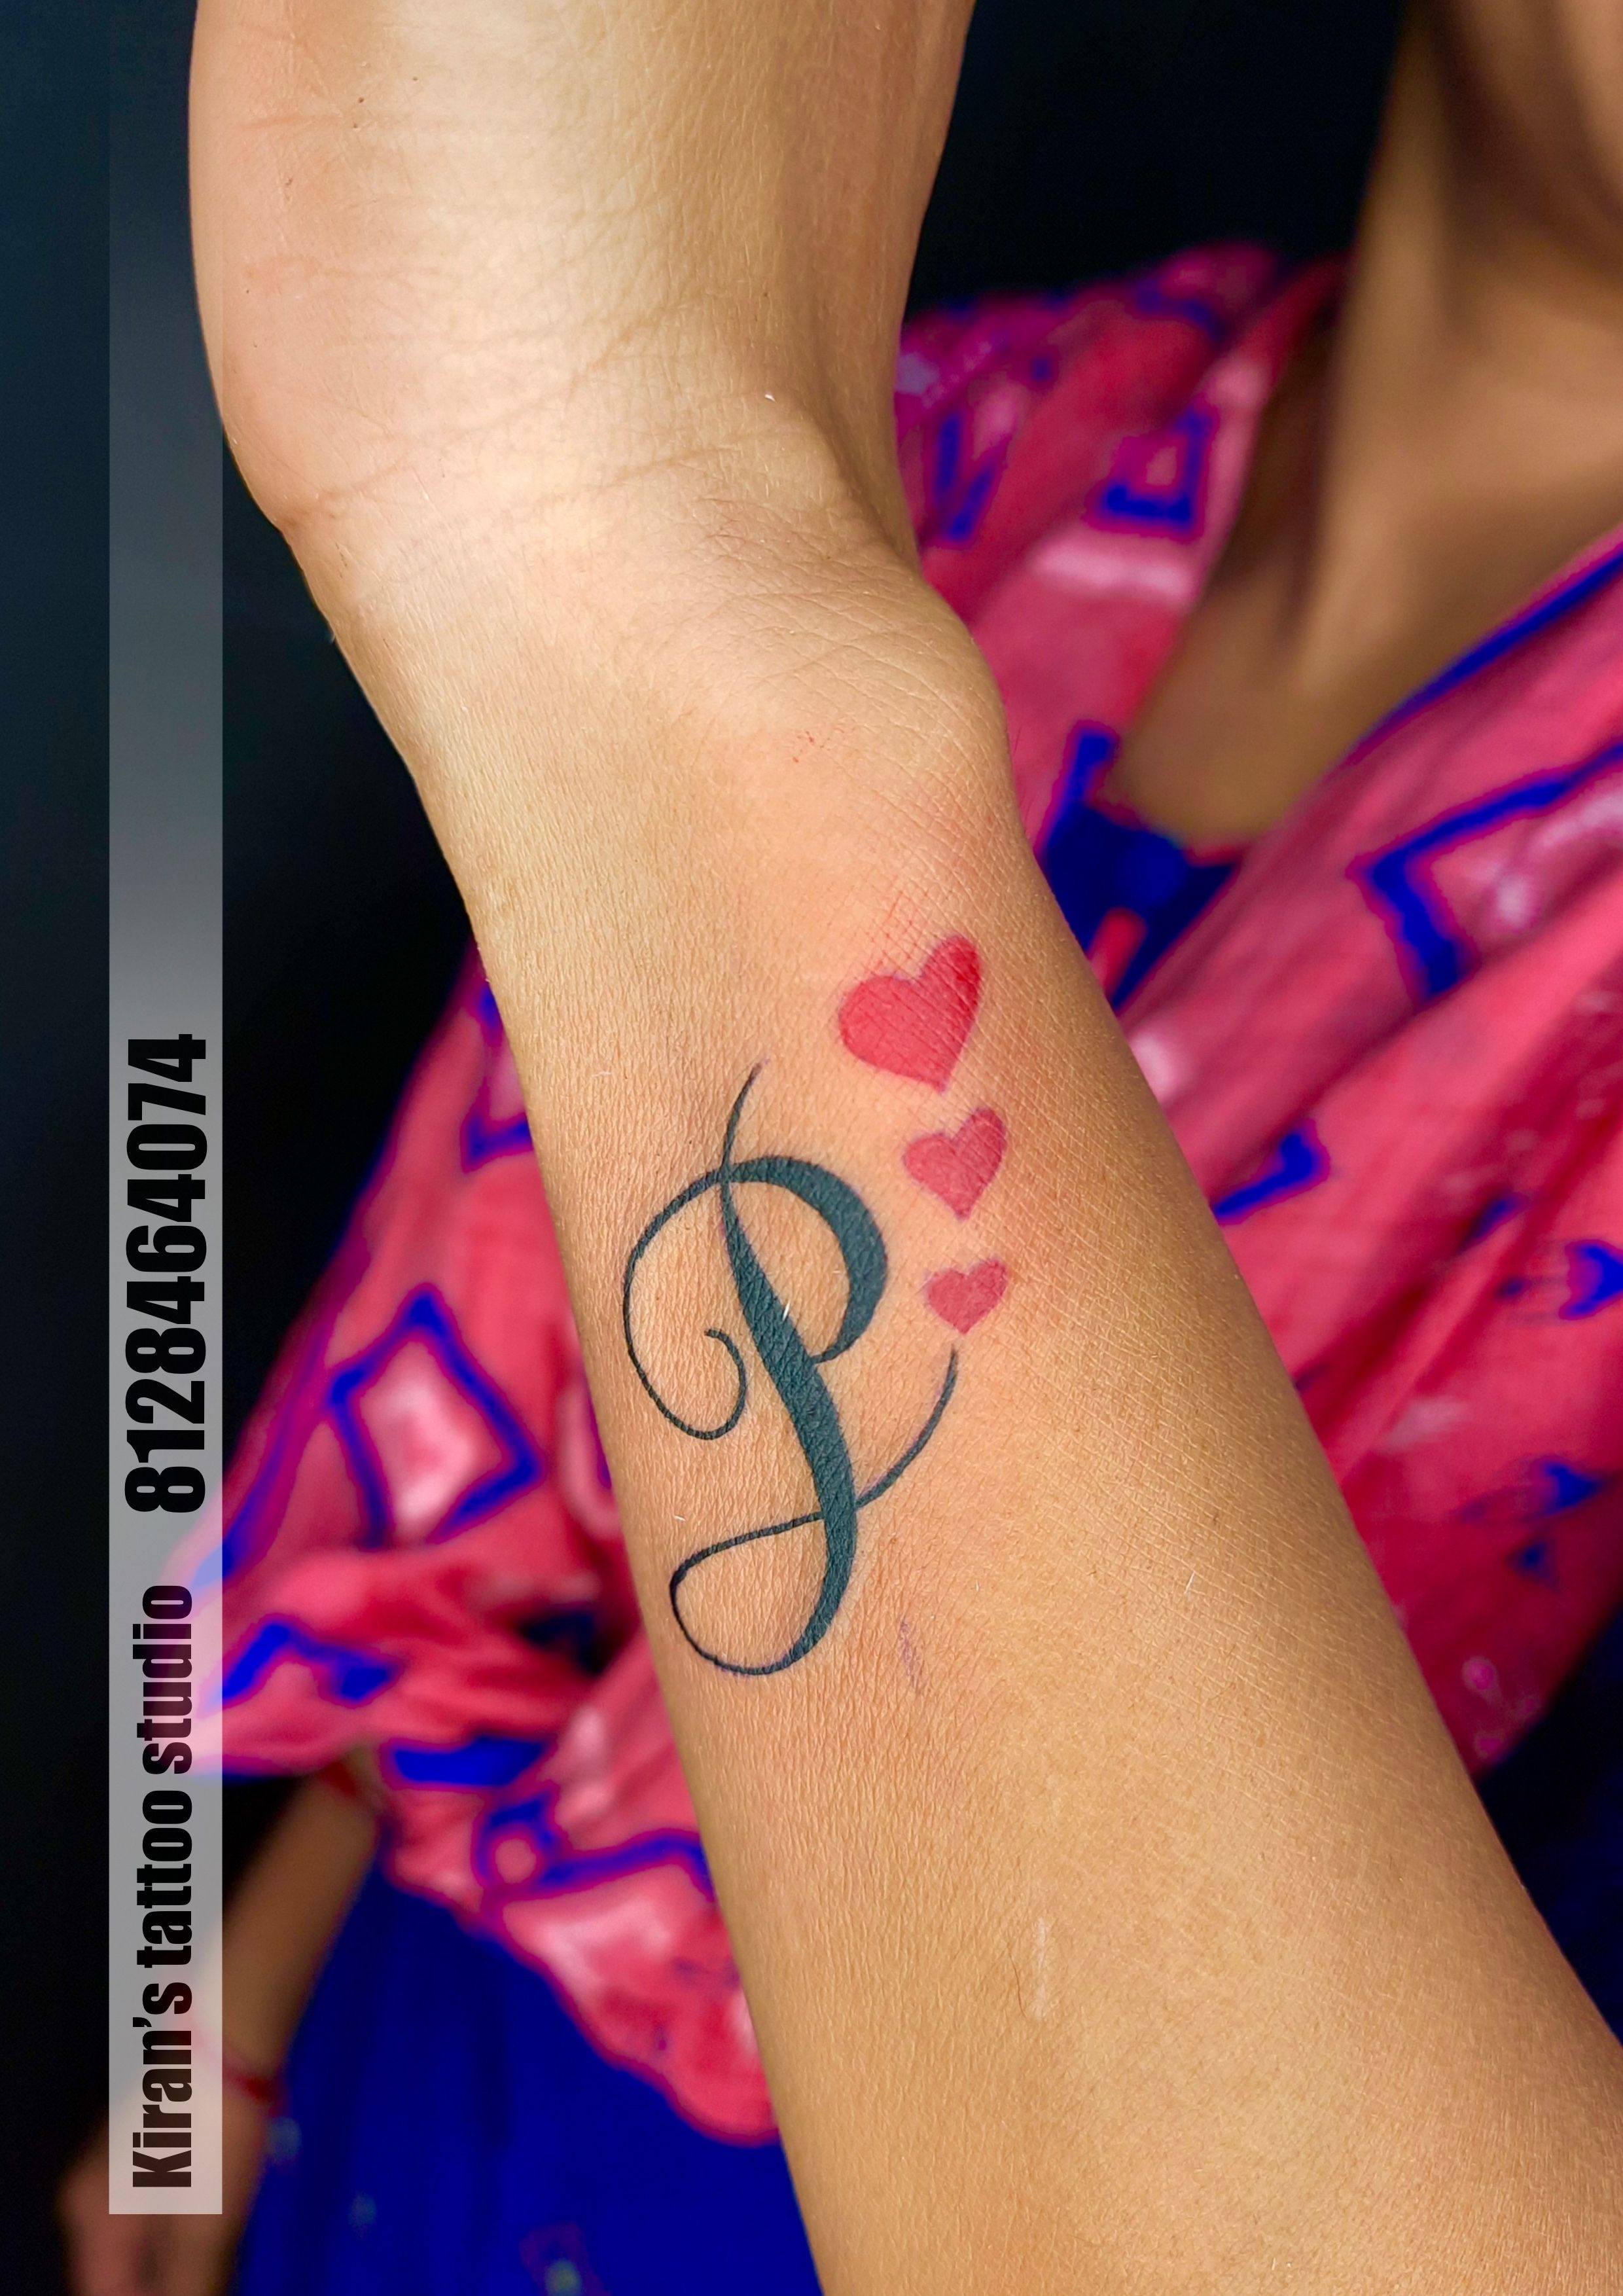 Ordershock PZ Name Letter Tattoo Waterproof Boys and Girls Temporary Body  Tattoo Pack of 2. - Price in India, Buy Ordershock PZ Name Letter Tattoo  Waterproof Boys and Girls Temporary Body Tattoo